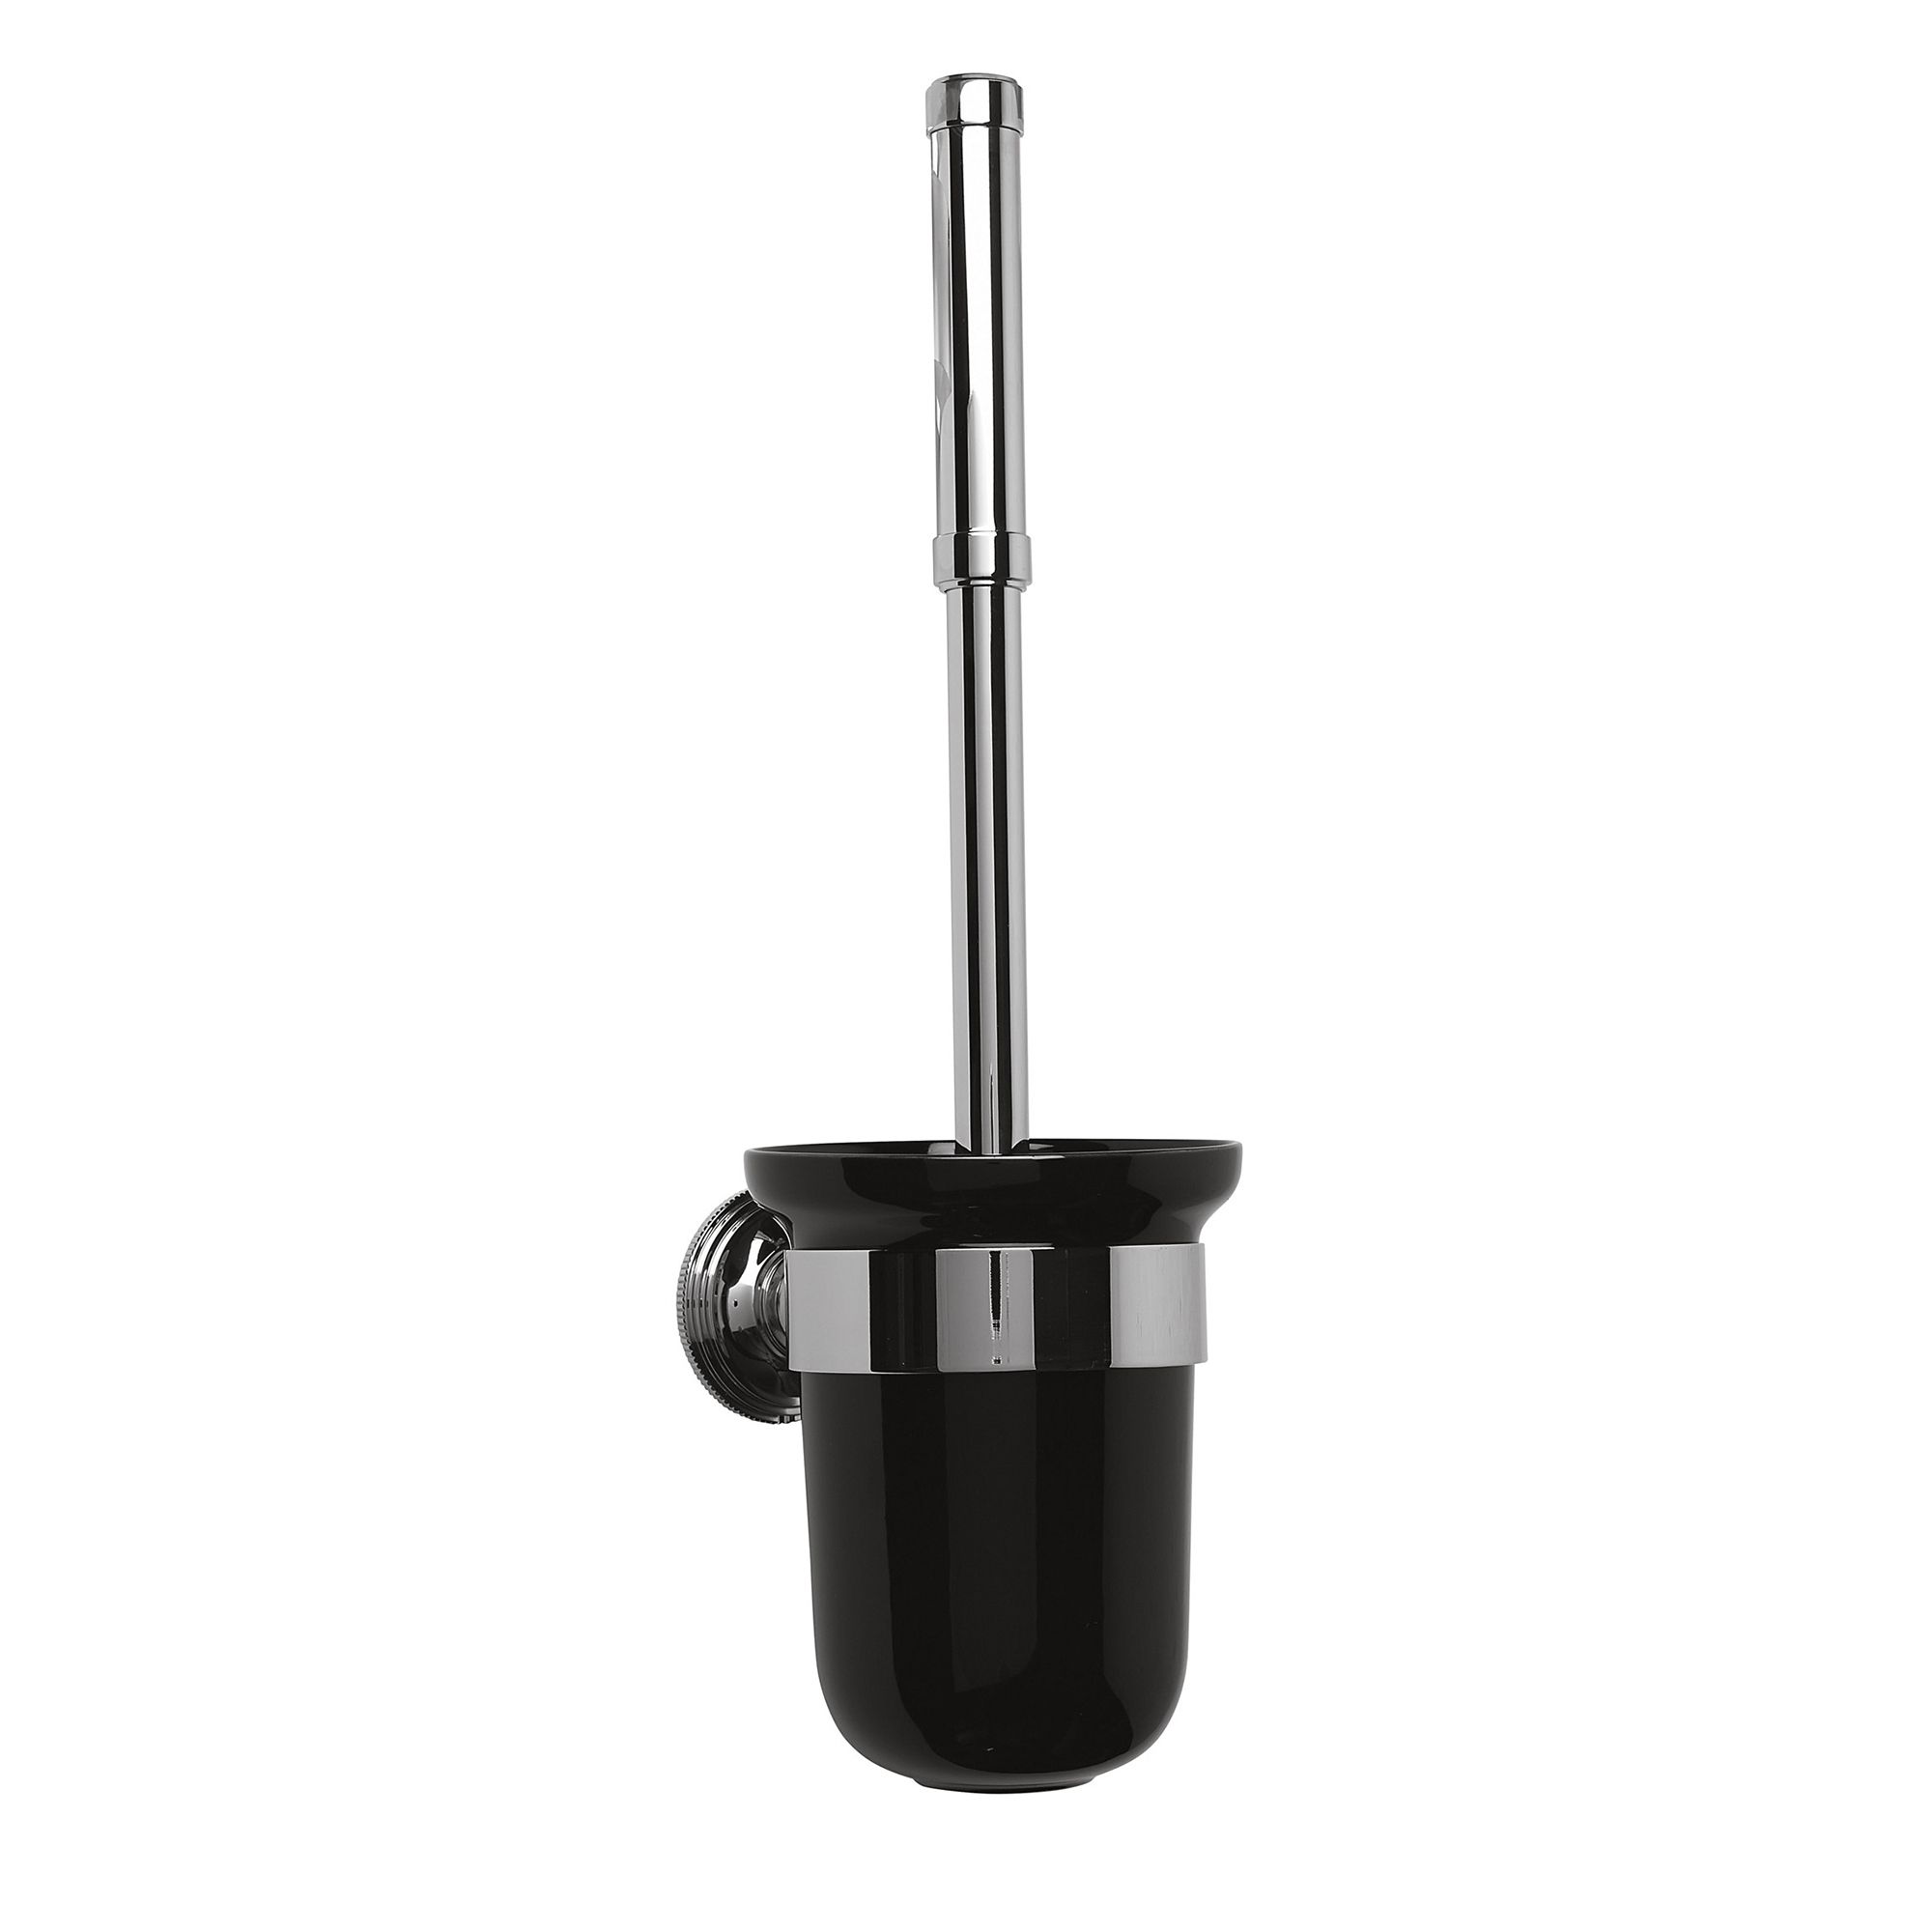 Empire Wall Mounted Toilet Brush